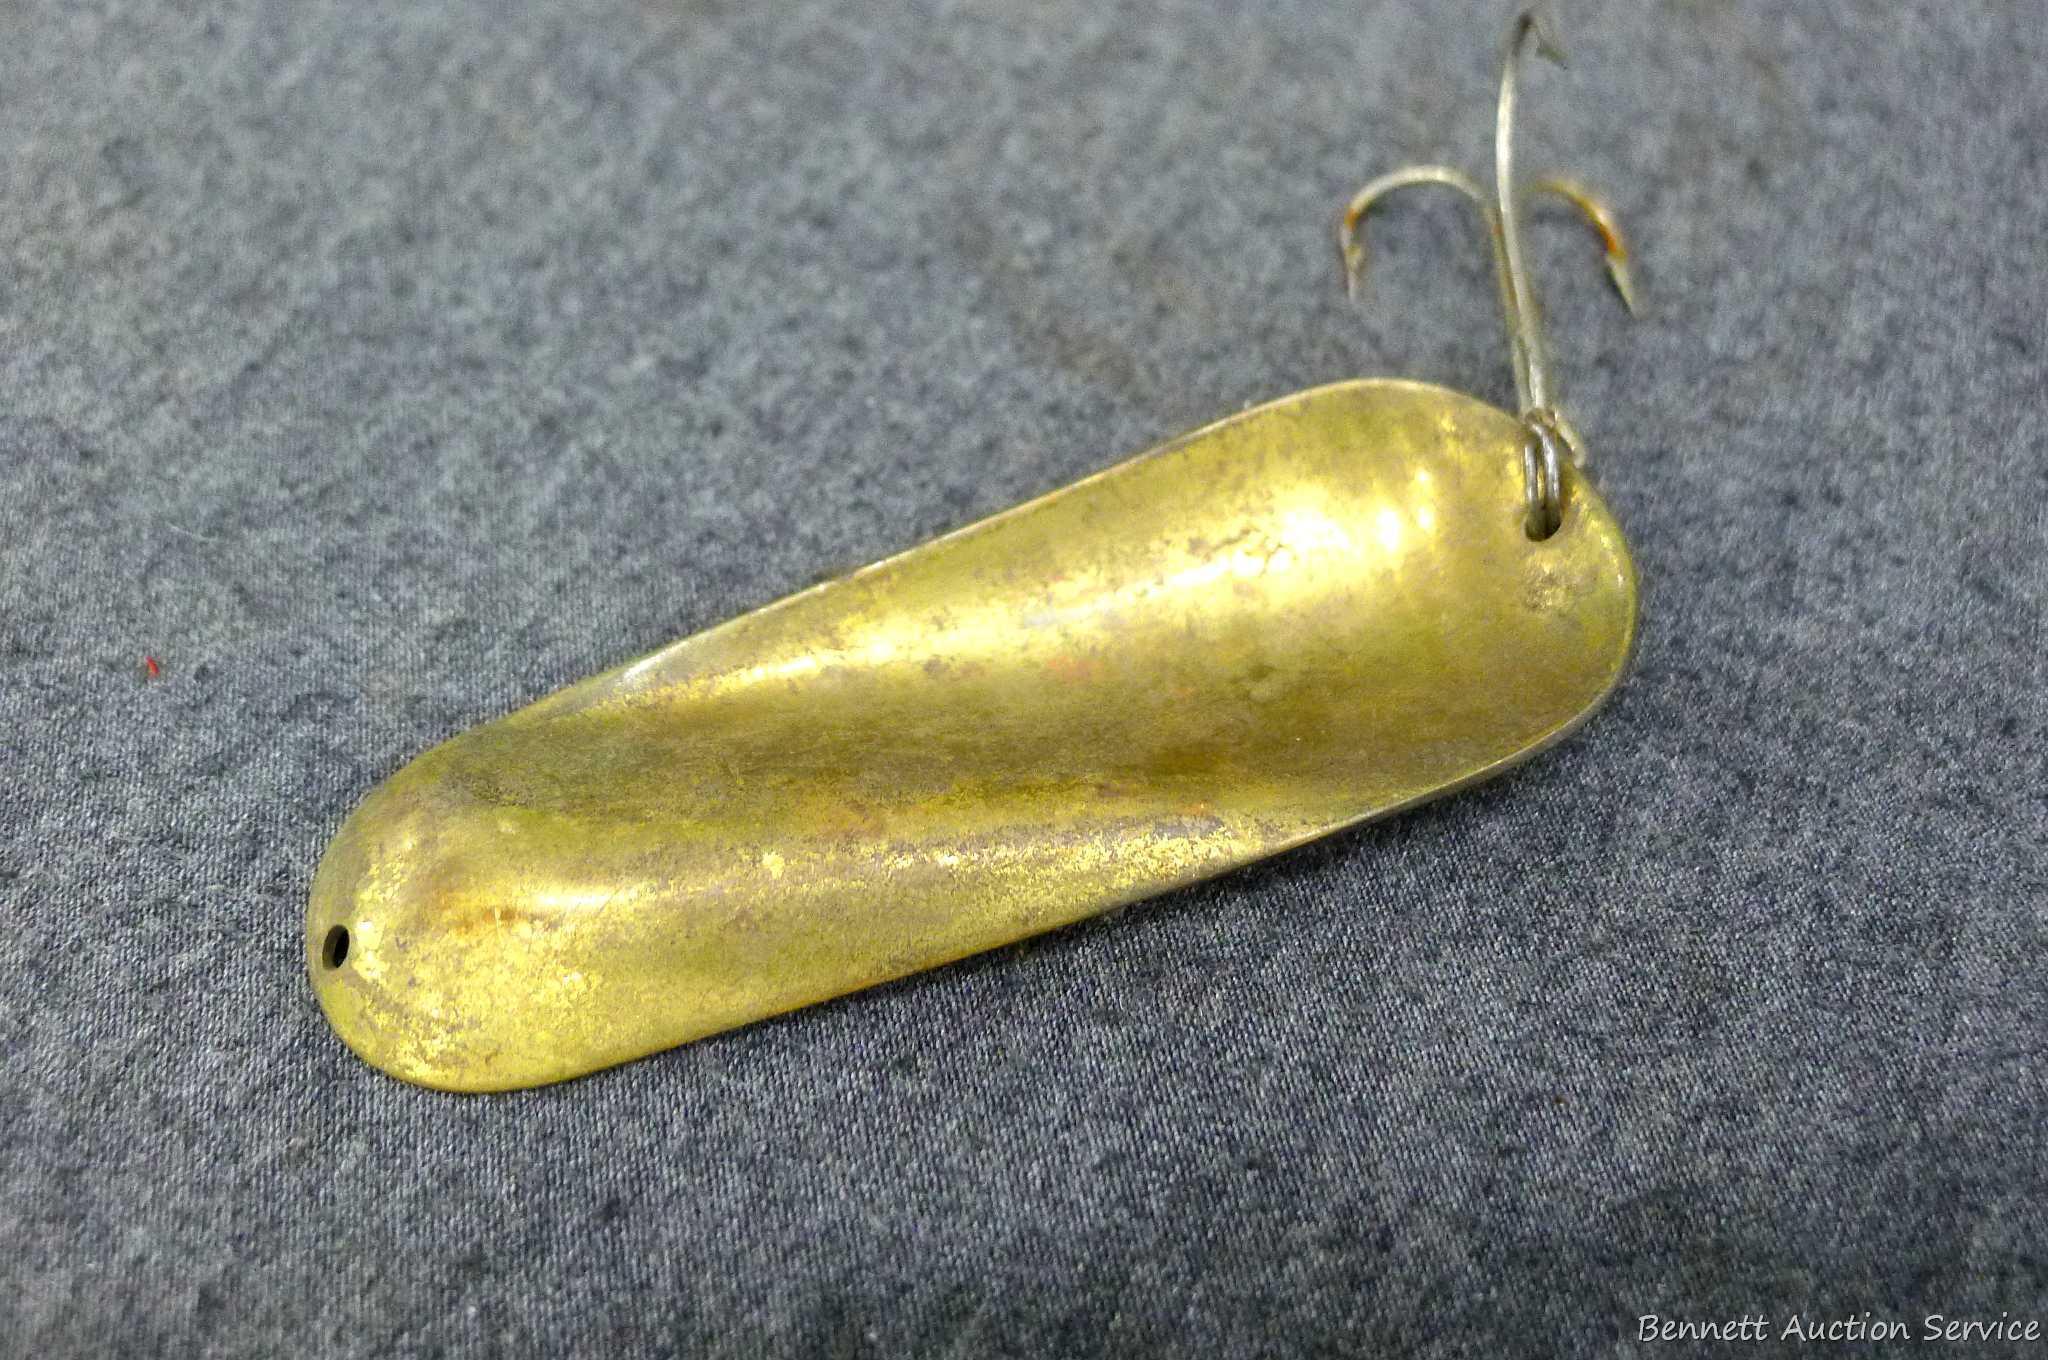 Vintage Silver Demon "Dazzler" fishing lure is nearly 5" over hooks. Made in Burningham Mich. USA.